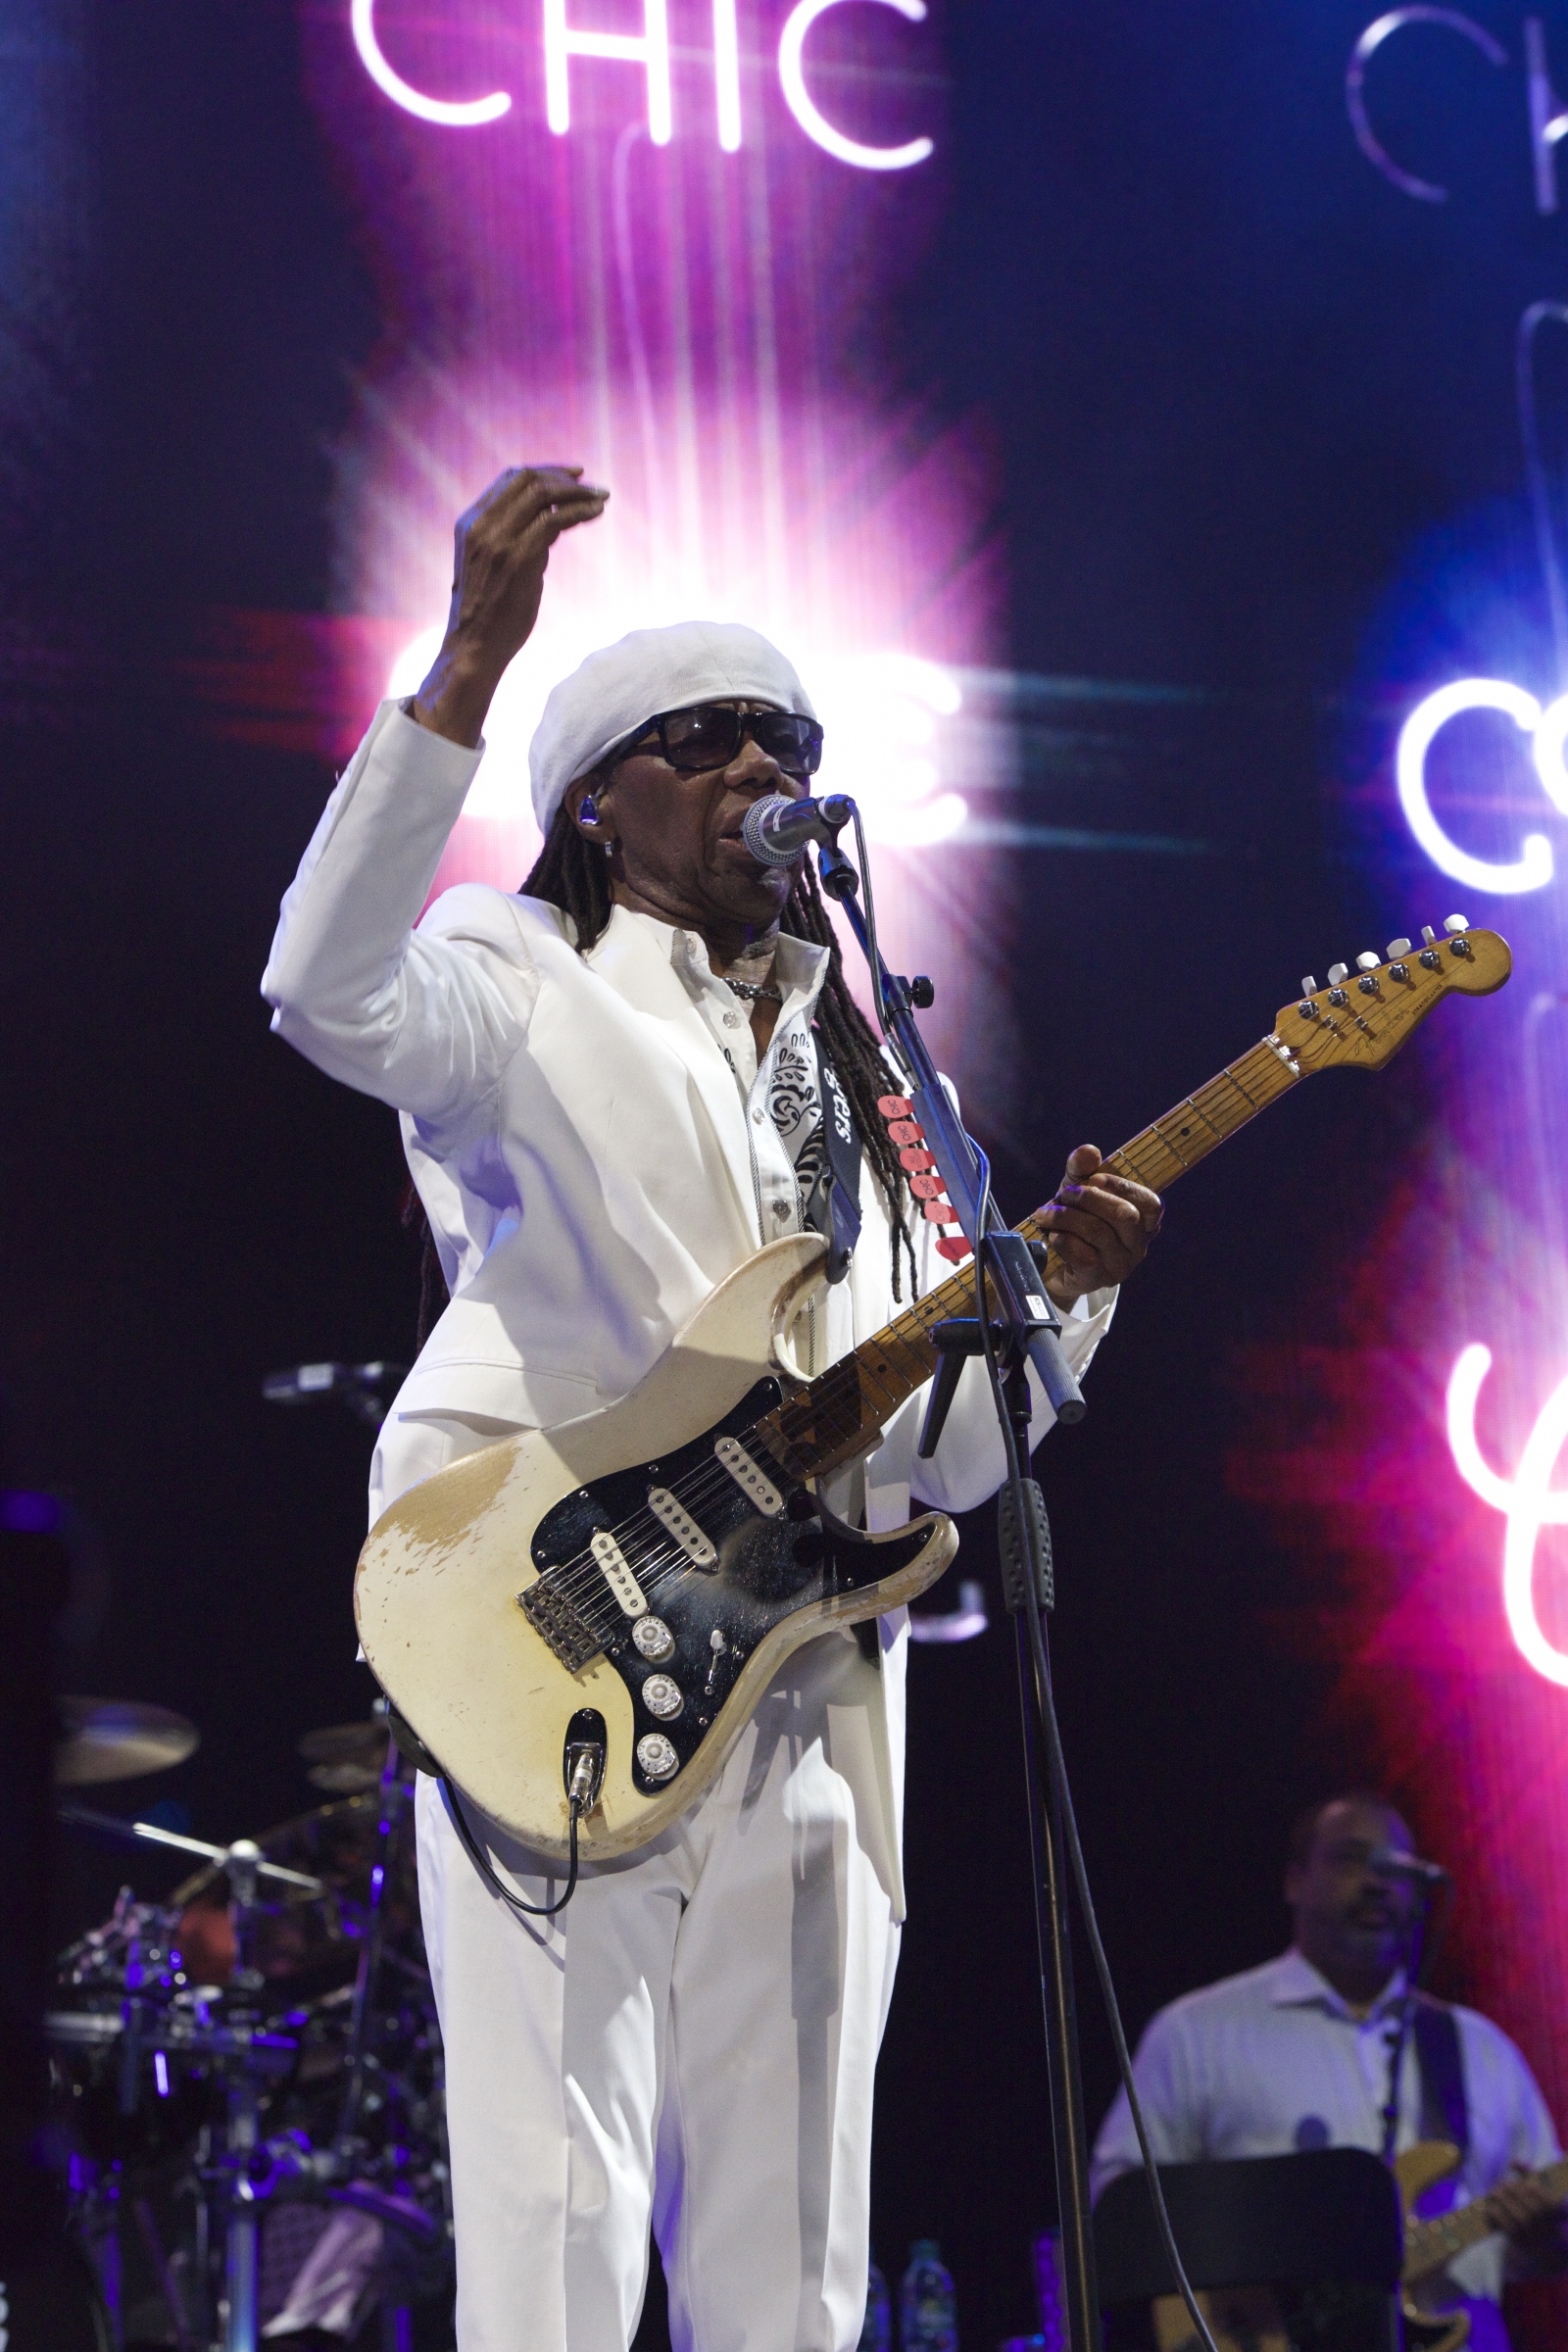 Nile Rodgers & Chic by Marc Marc McGarraghy